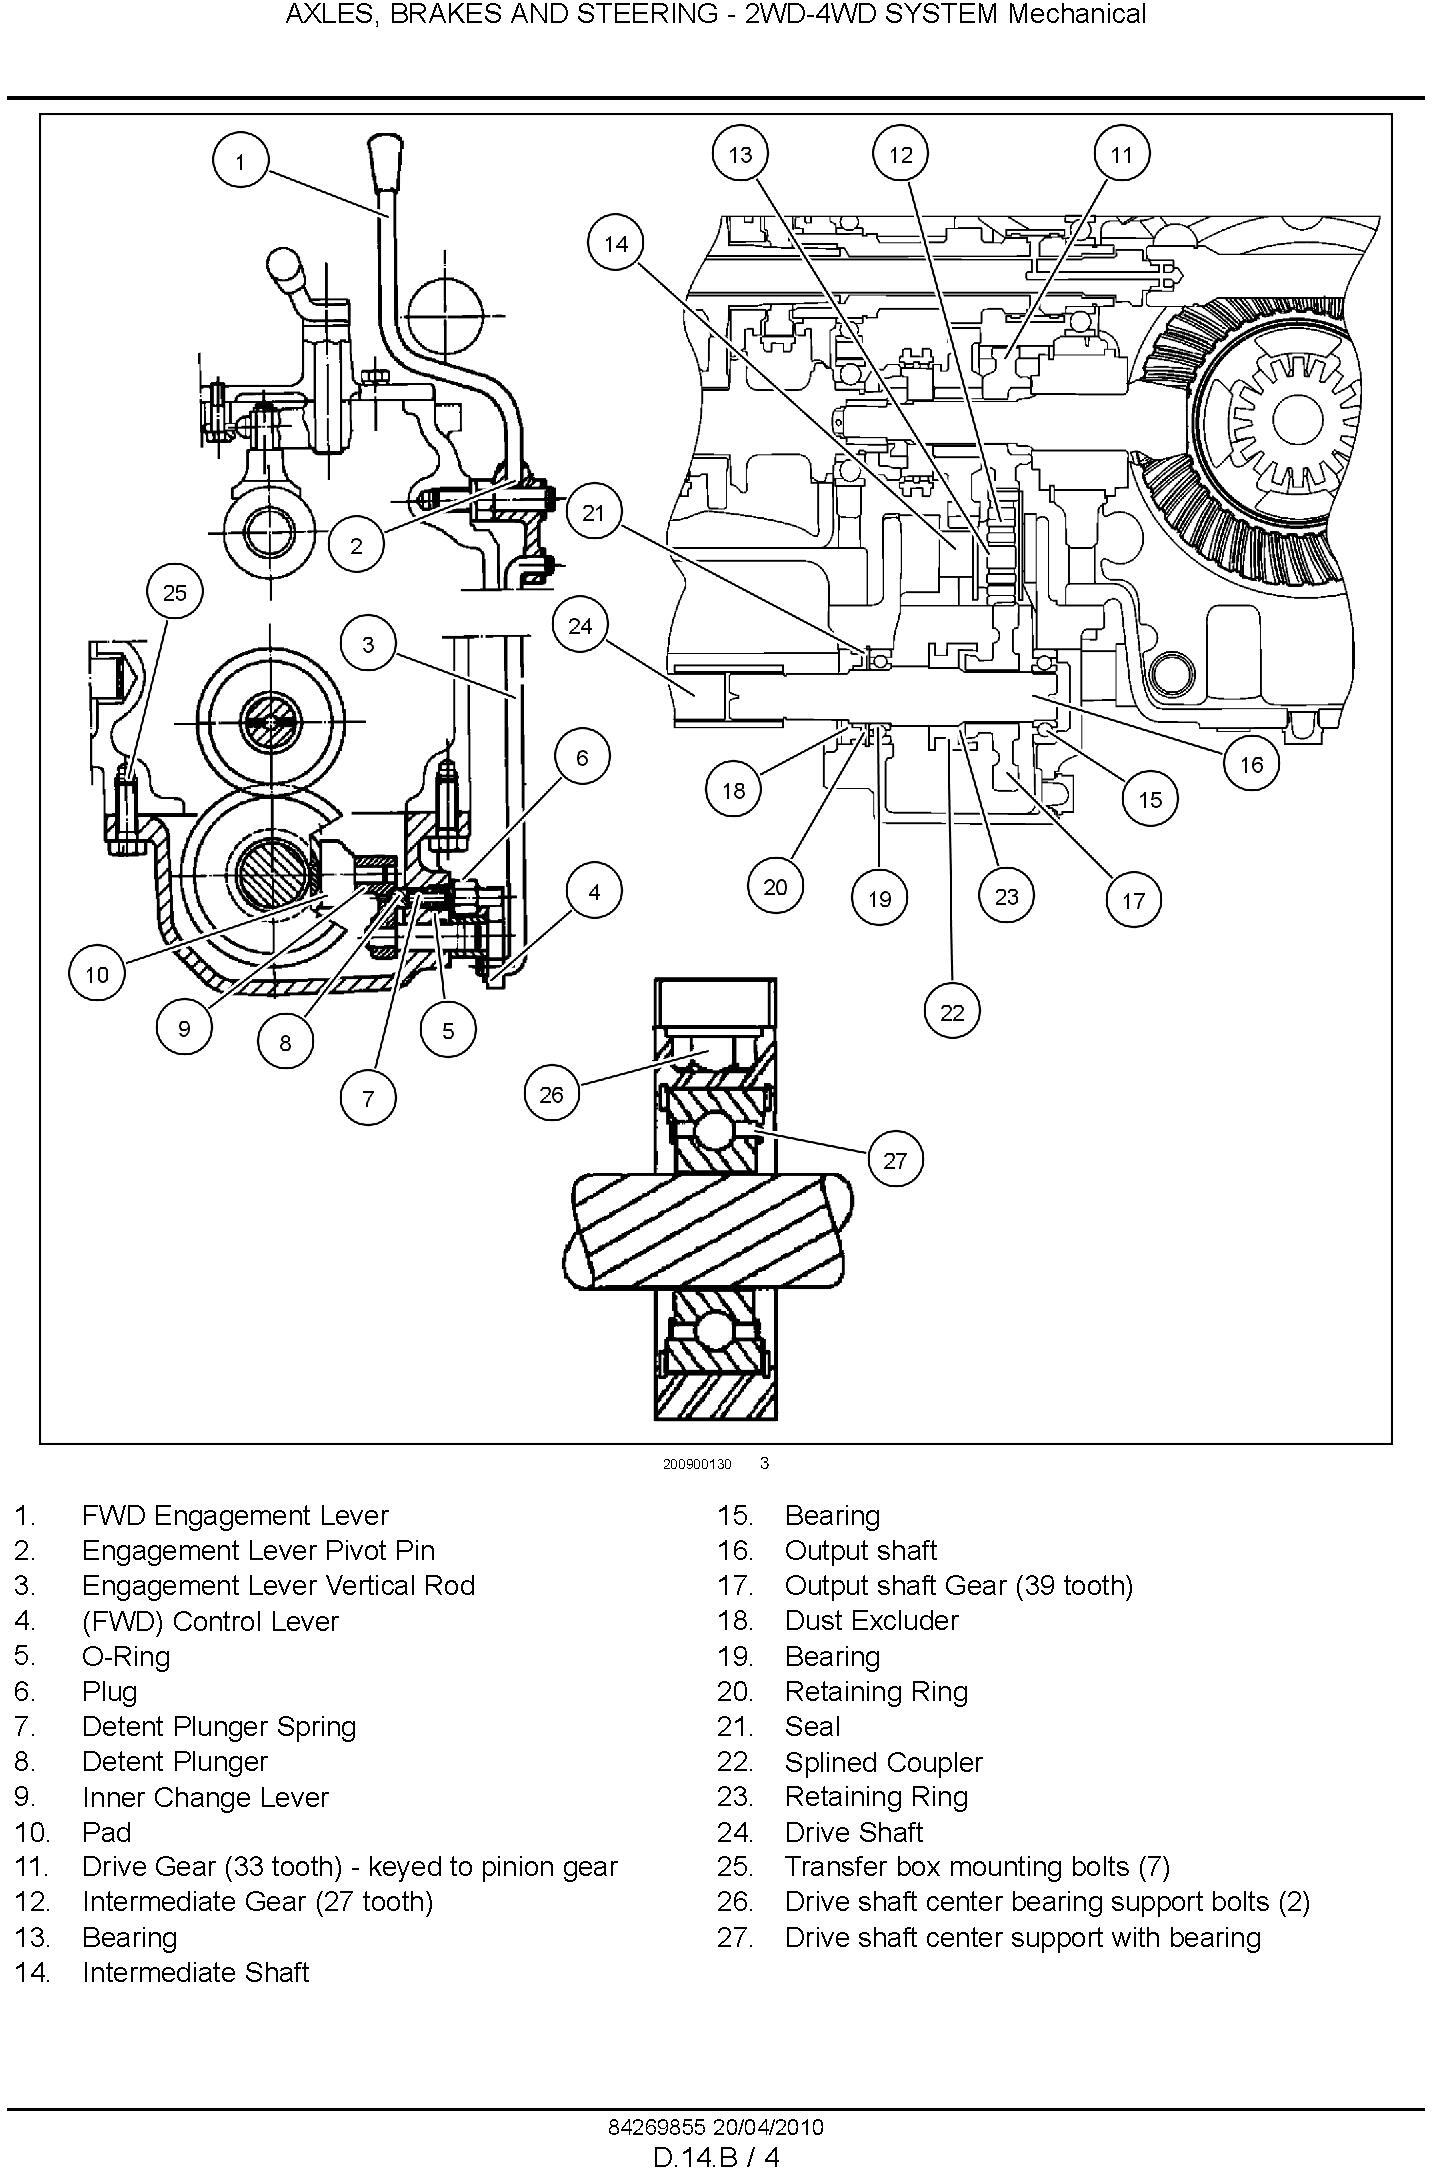 New Holland Workmaster 75, Workmaster 65 Tractor Complete Service Manual - 3